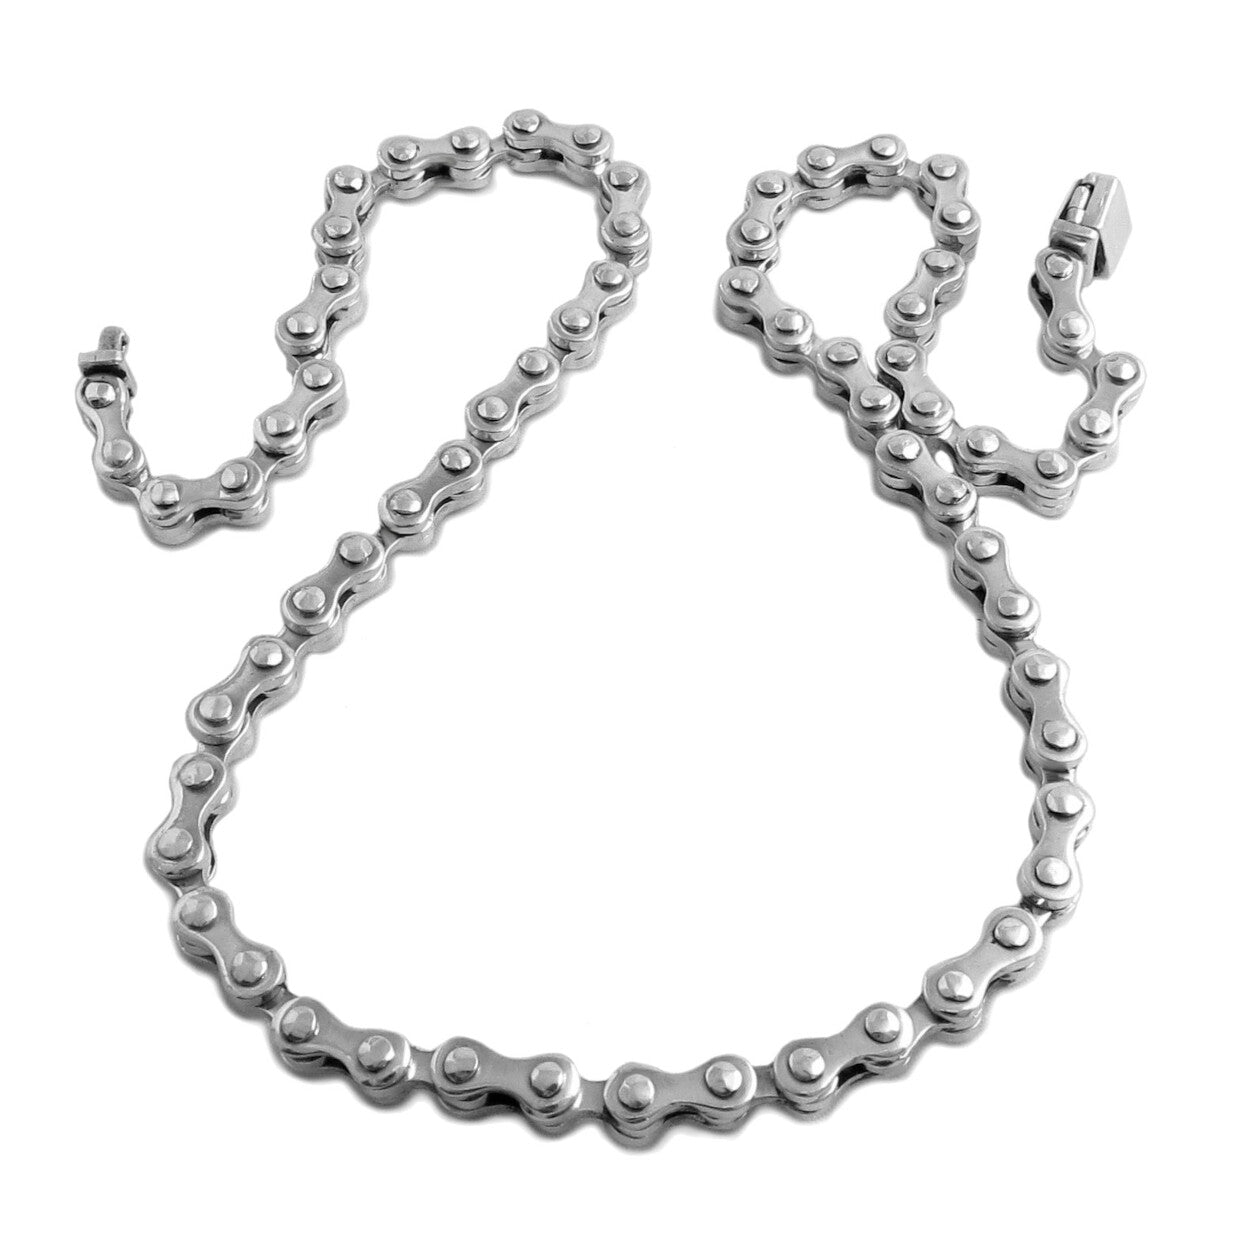 Single Link Bike Chain Necklace – ATHLETE INSPIRED